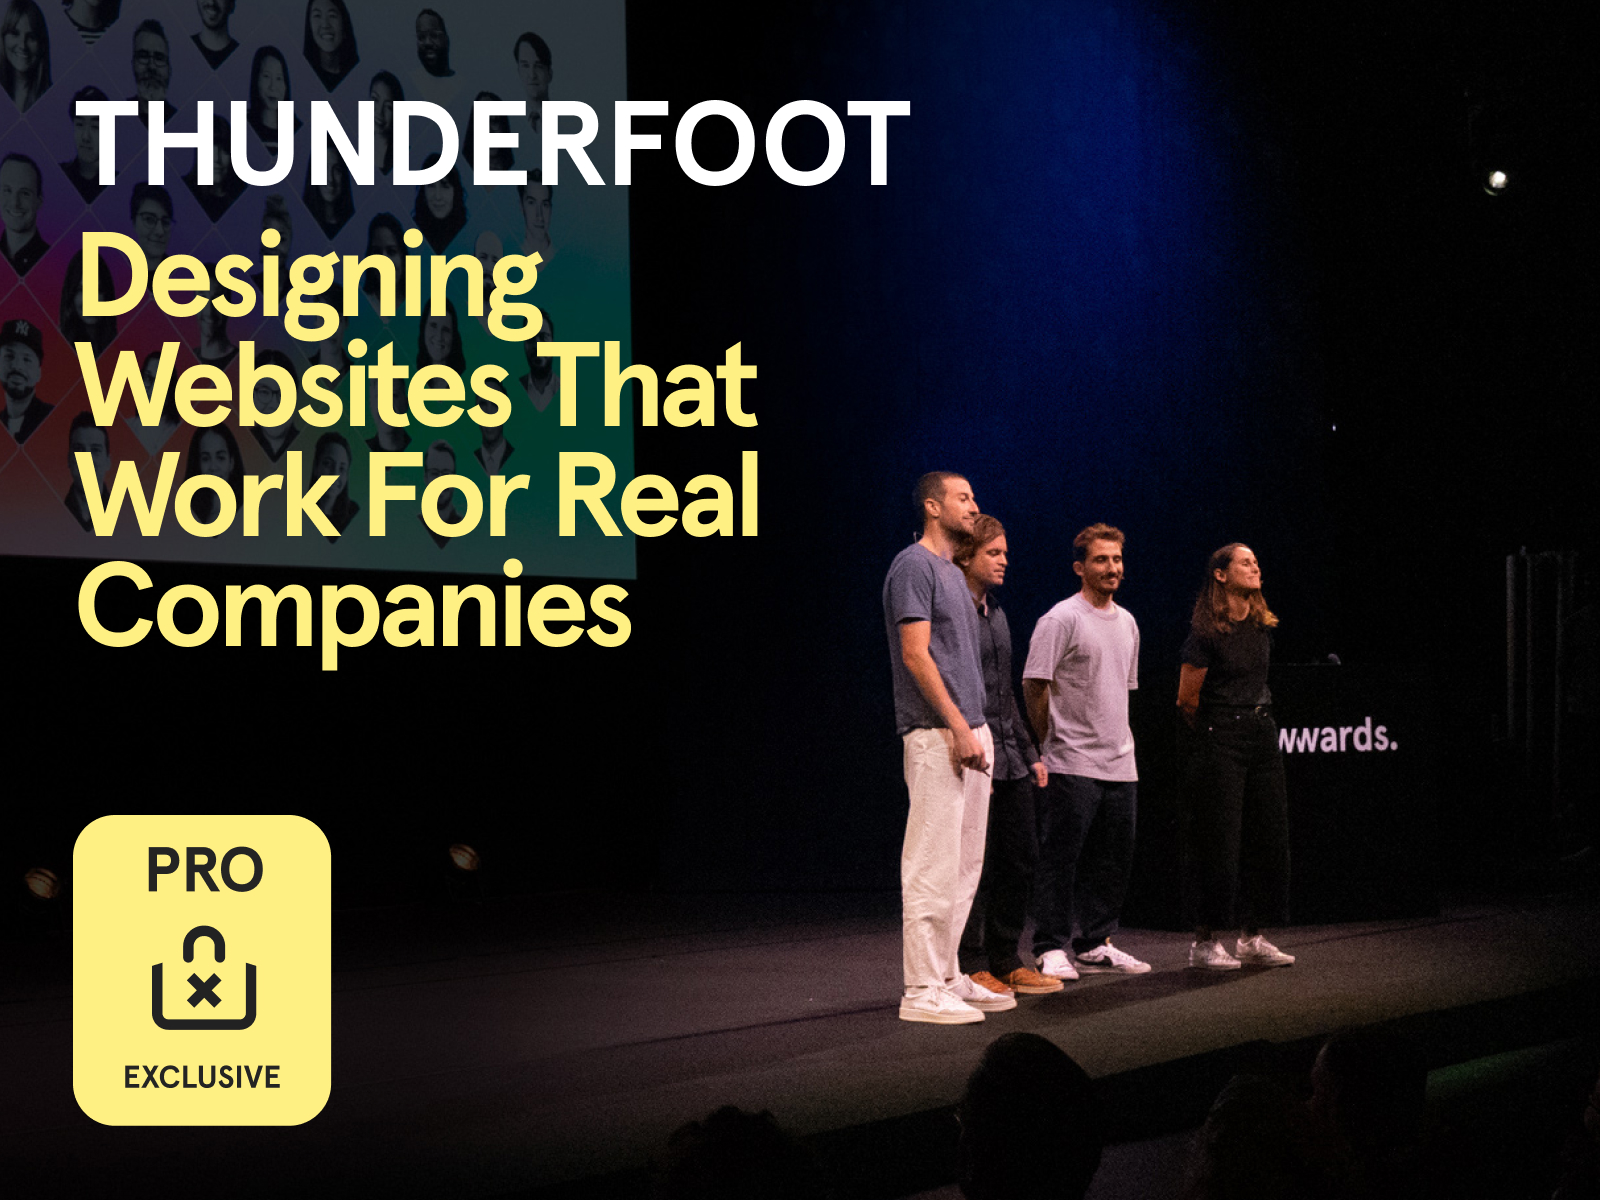 New PRO Content available: watch Thunderfoot's new talk from Awwwards Conference Amsterdam